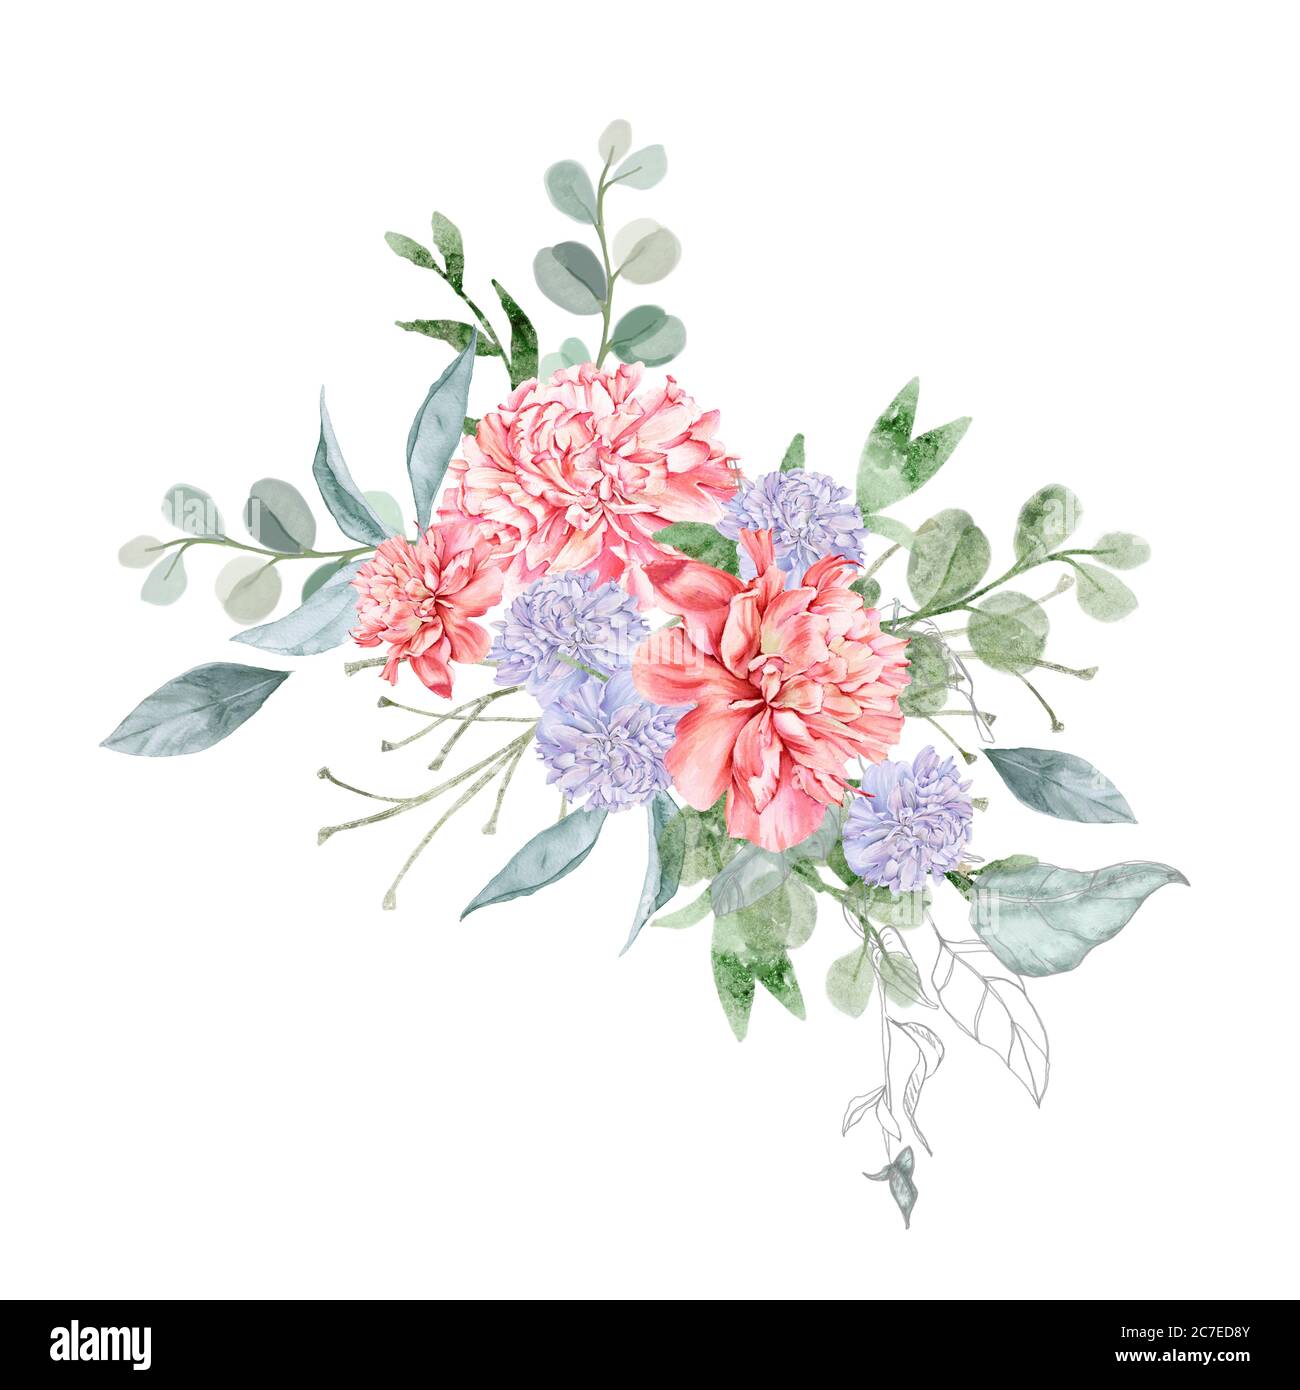 Bouquet of peony flowers. Isolated drawing. Stock Photo